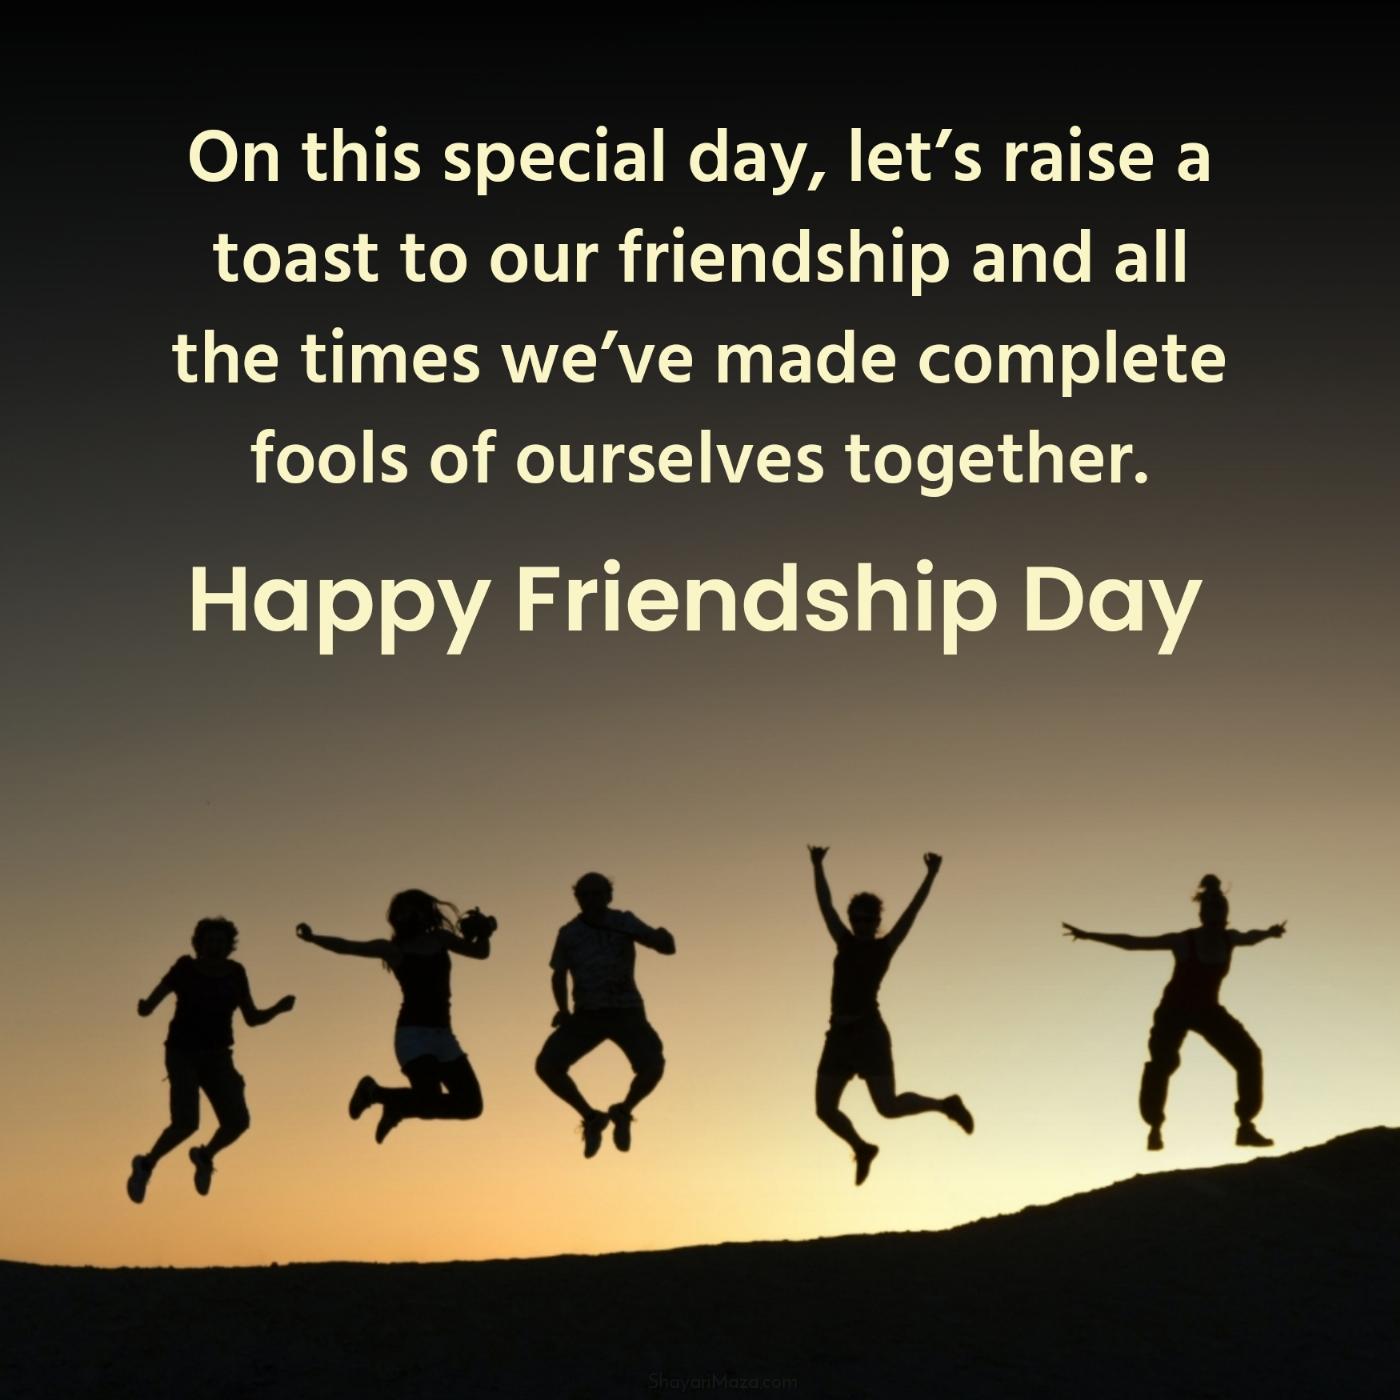 On this special day lets raise a toast to our friendship